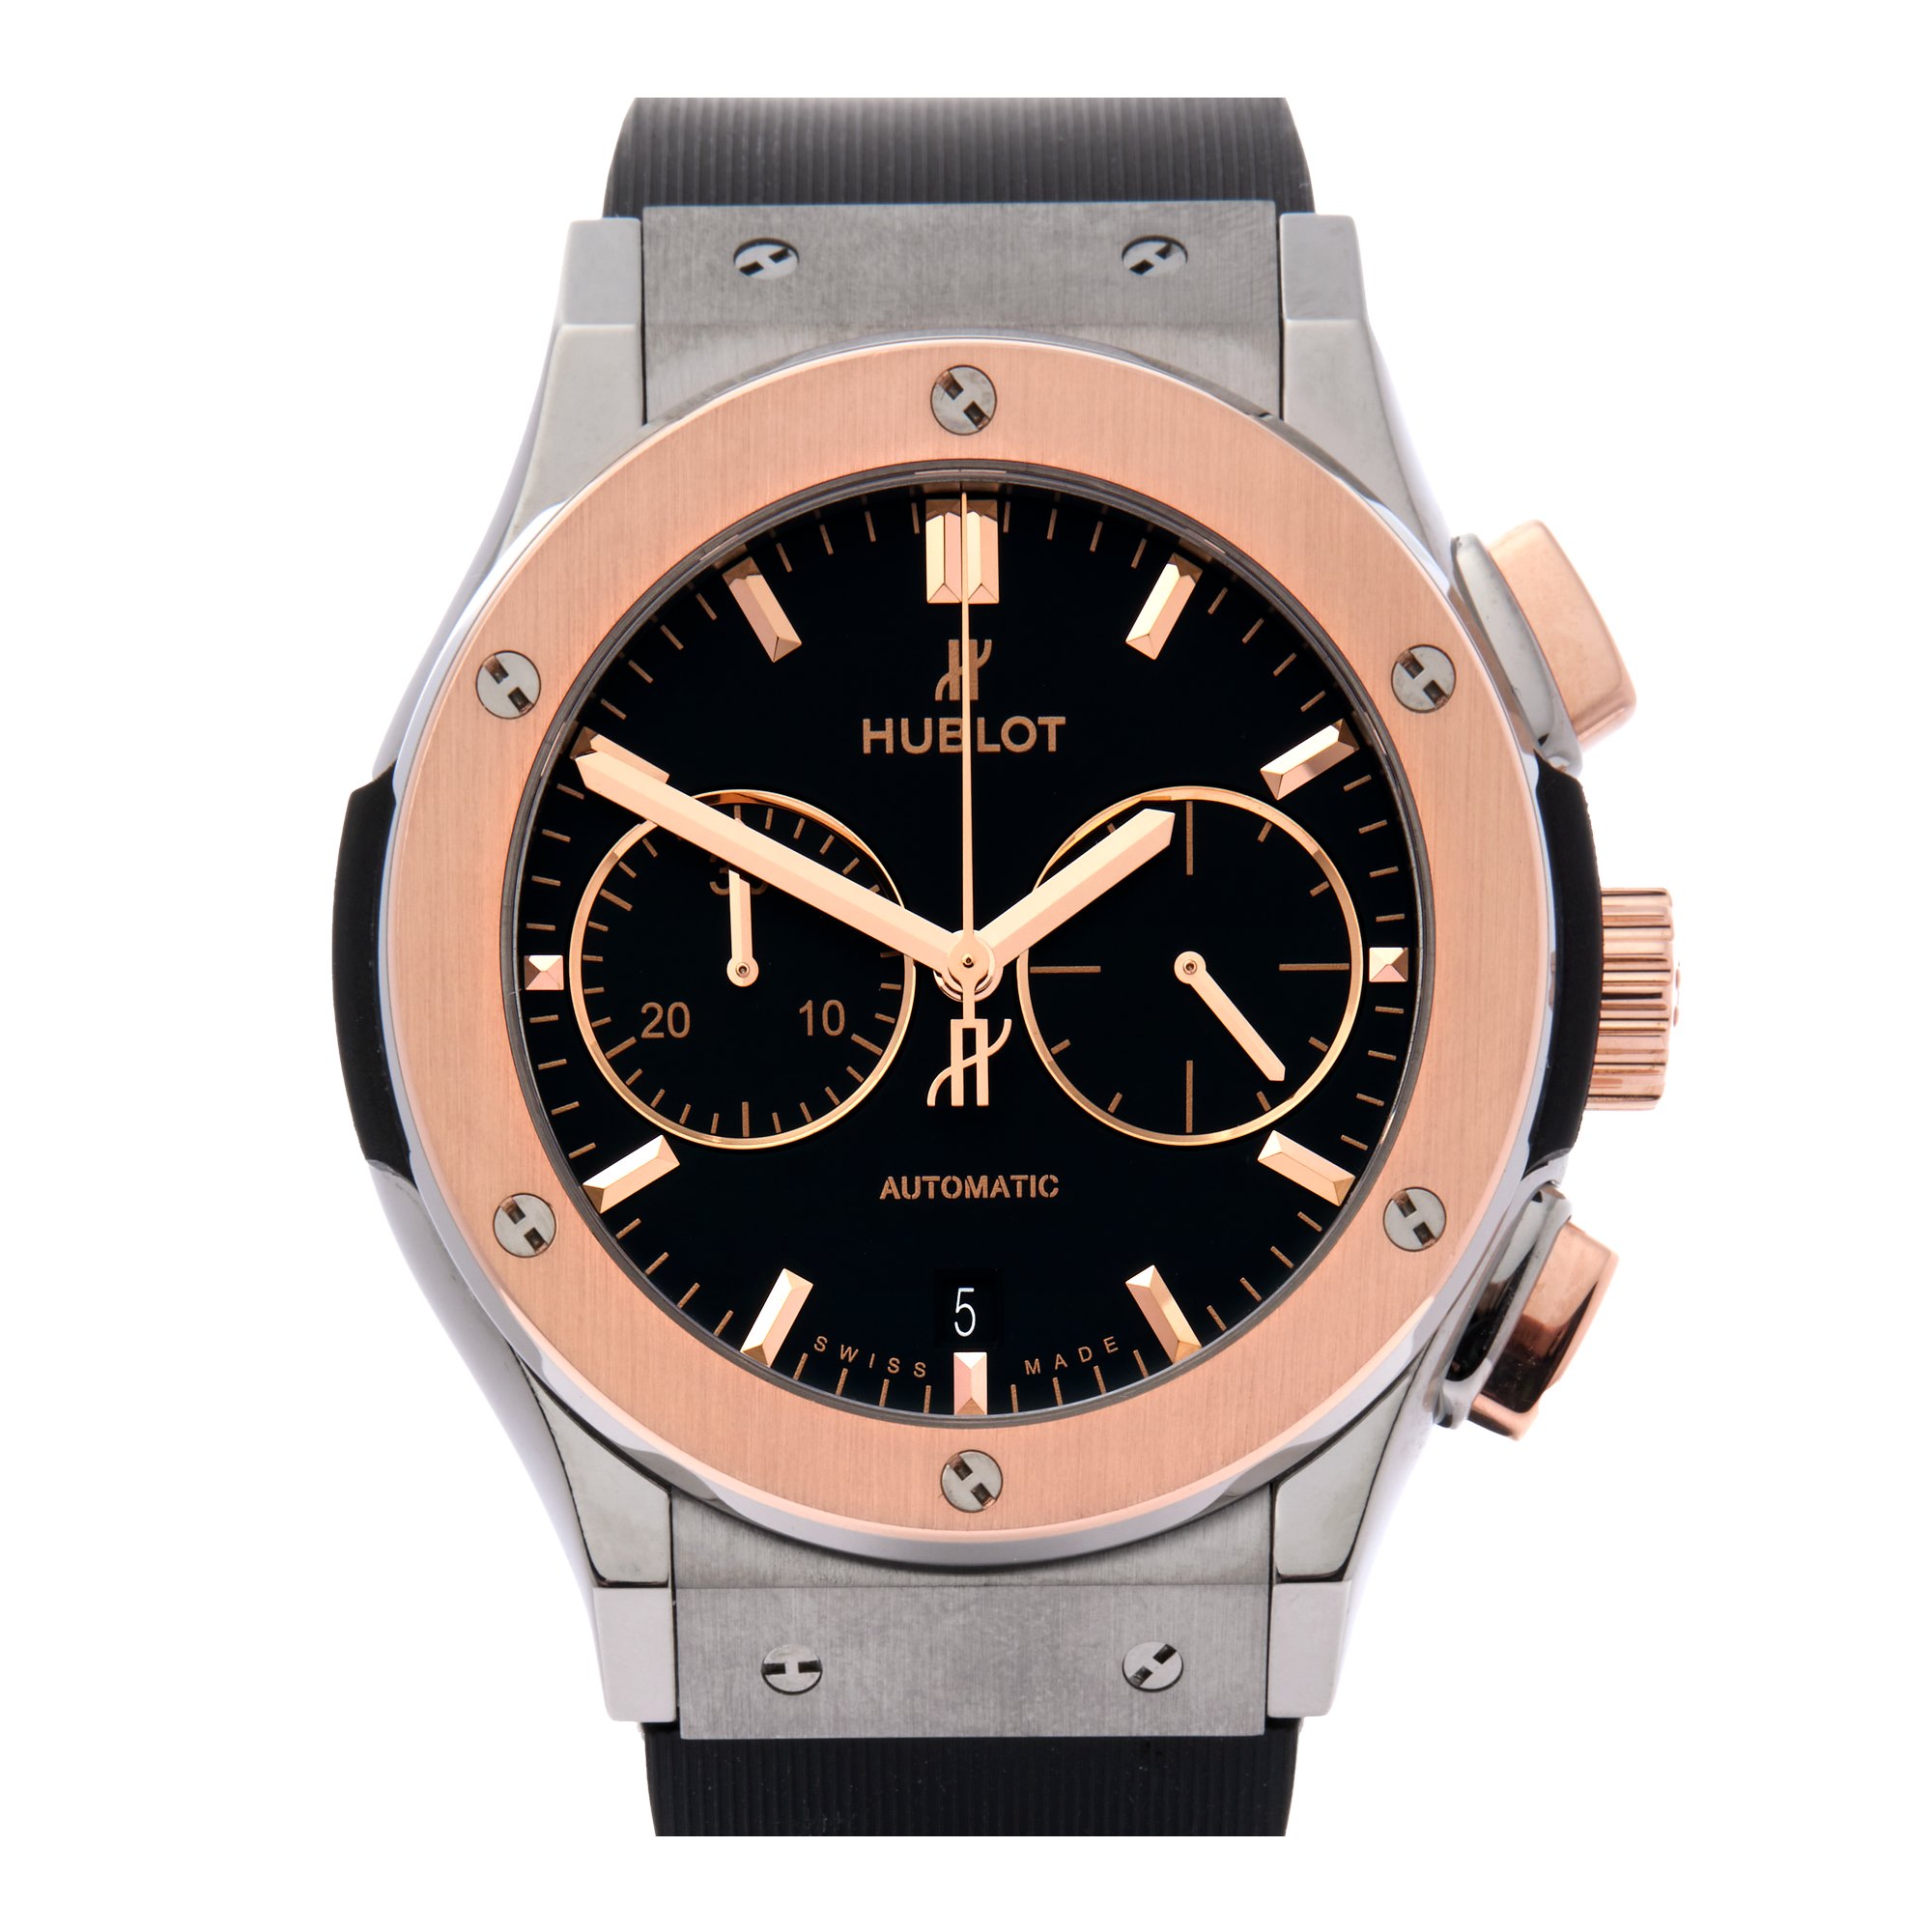 Hublot Classic Fusion 18K Rose Gold & Stainless Steel 521.NO.1181.RX